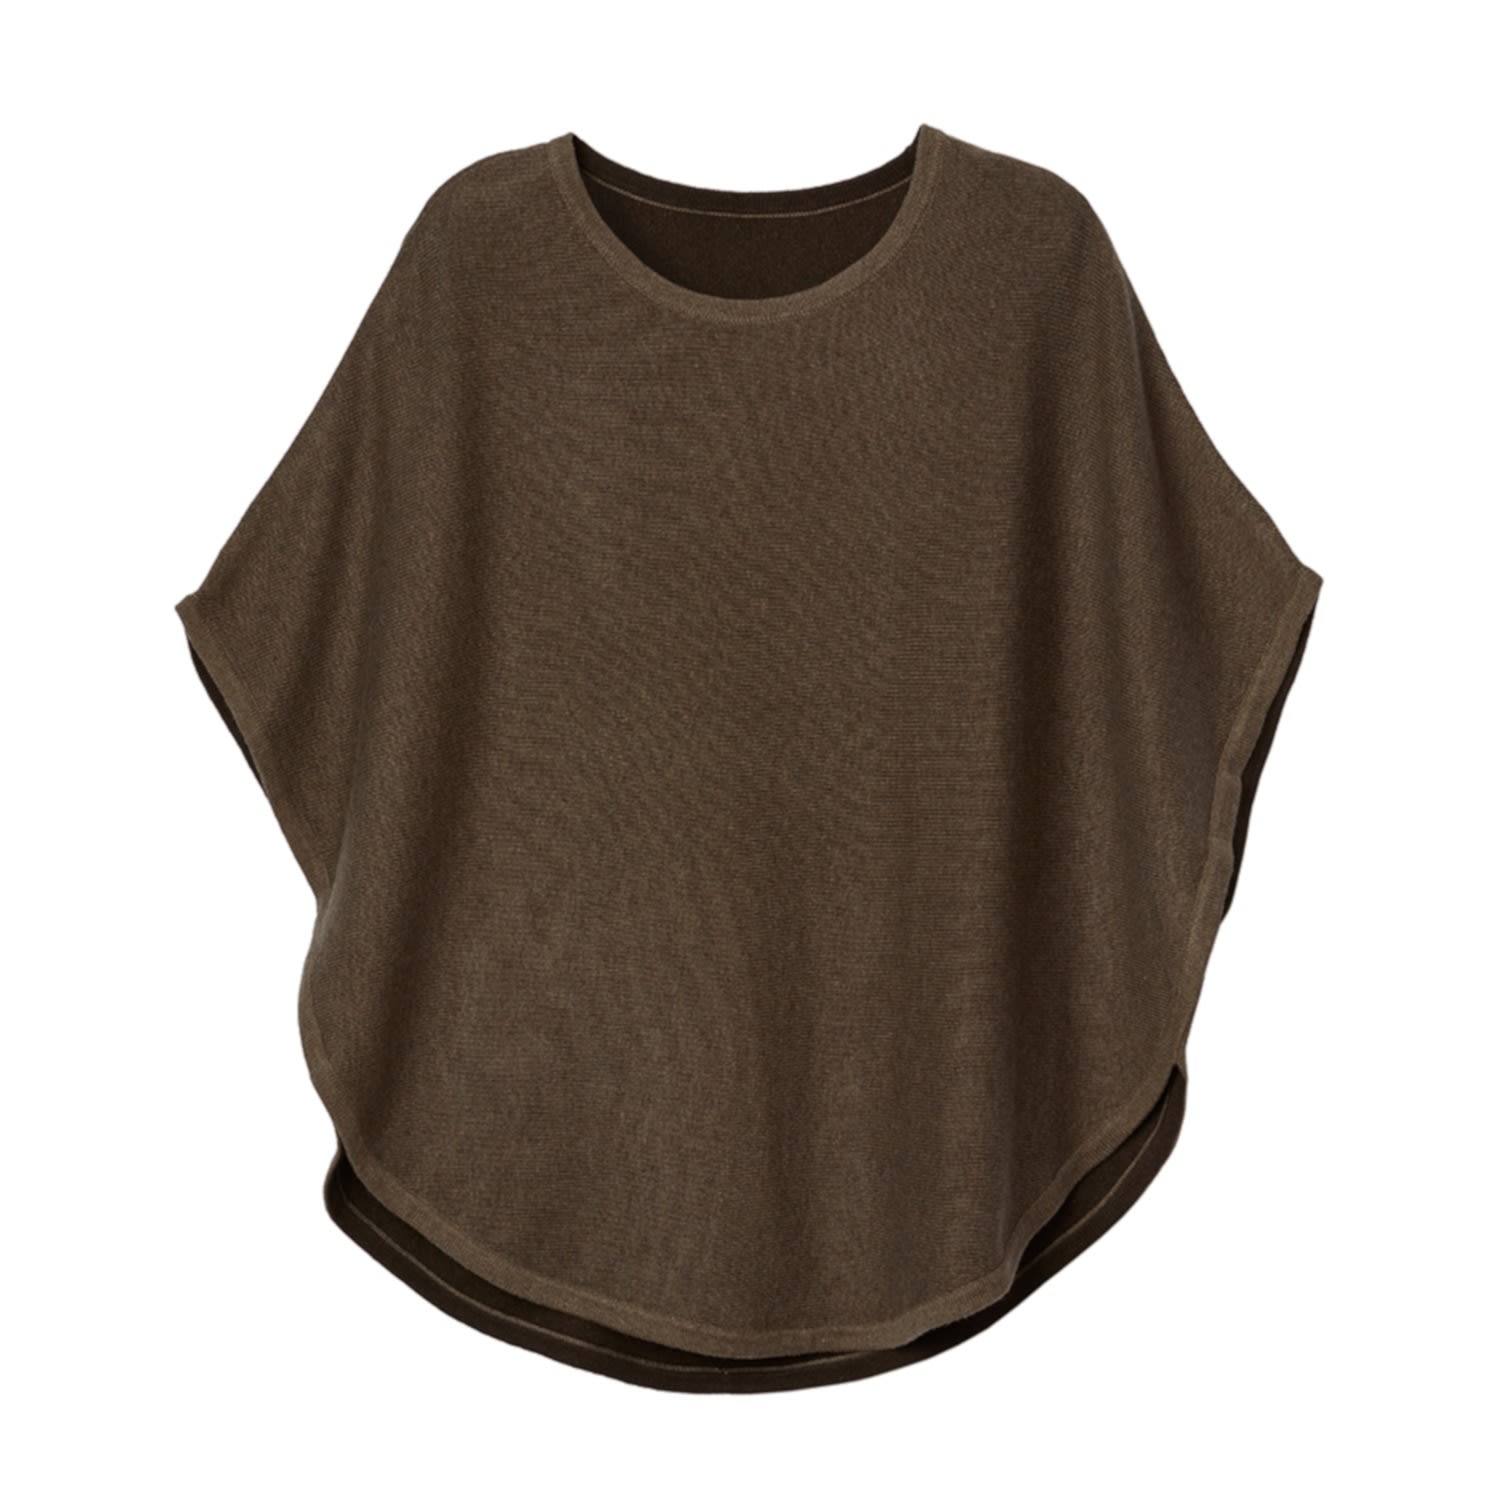 Cove Women's Brown Flora Cotton Cashmere Reversible Poncho Taupe & Brazil Nut